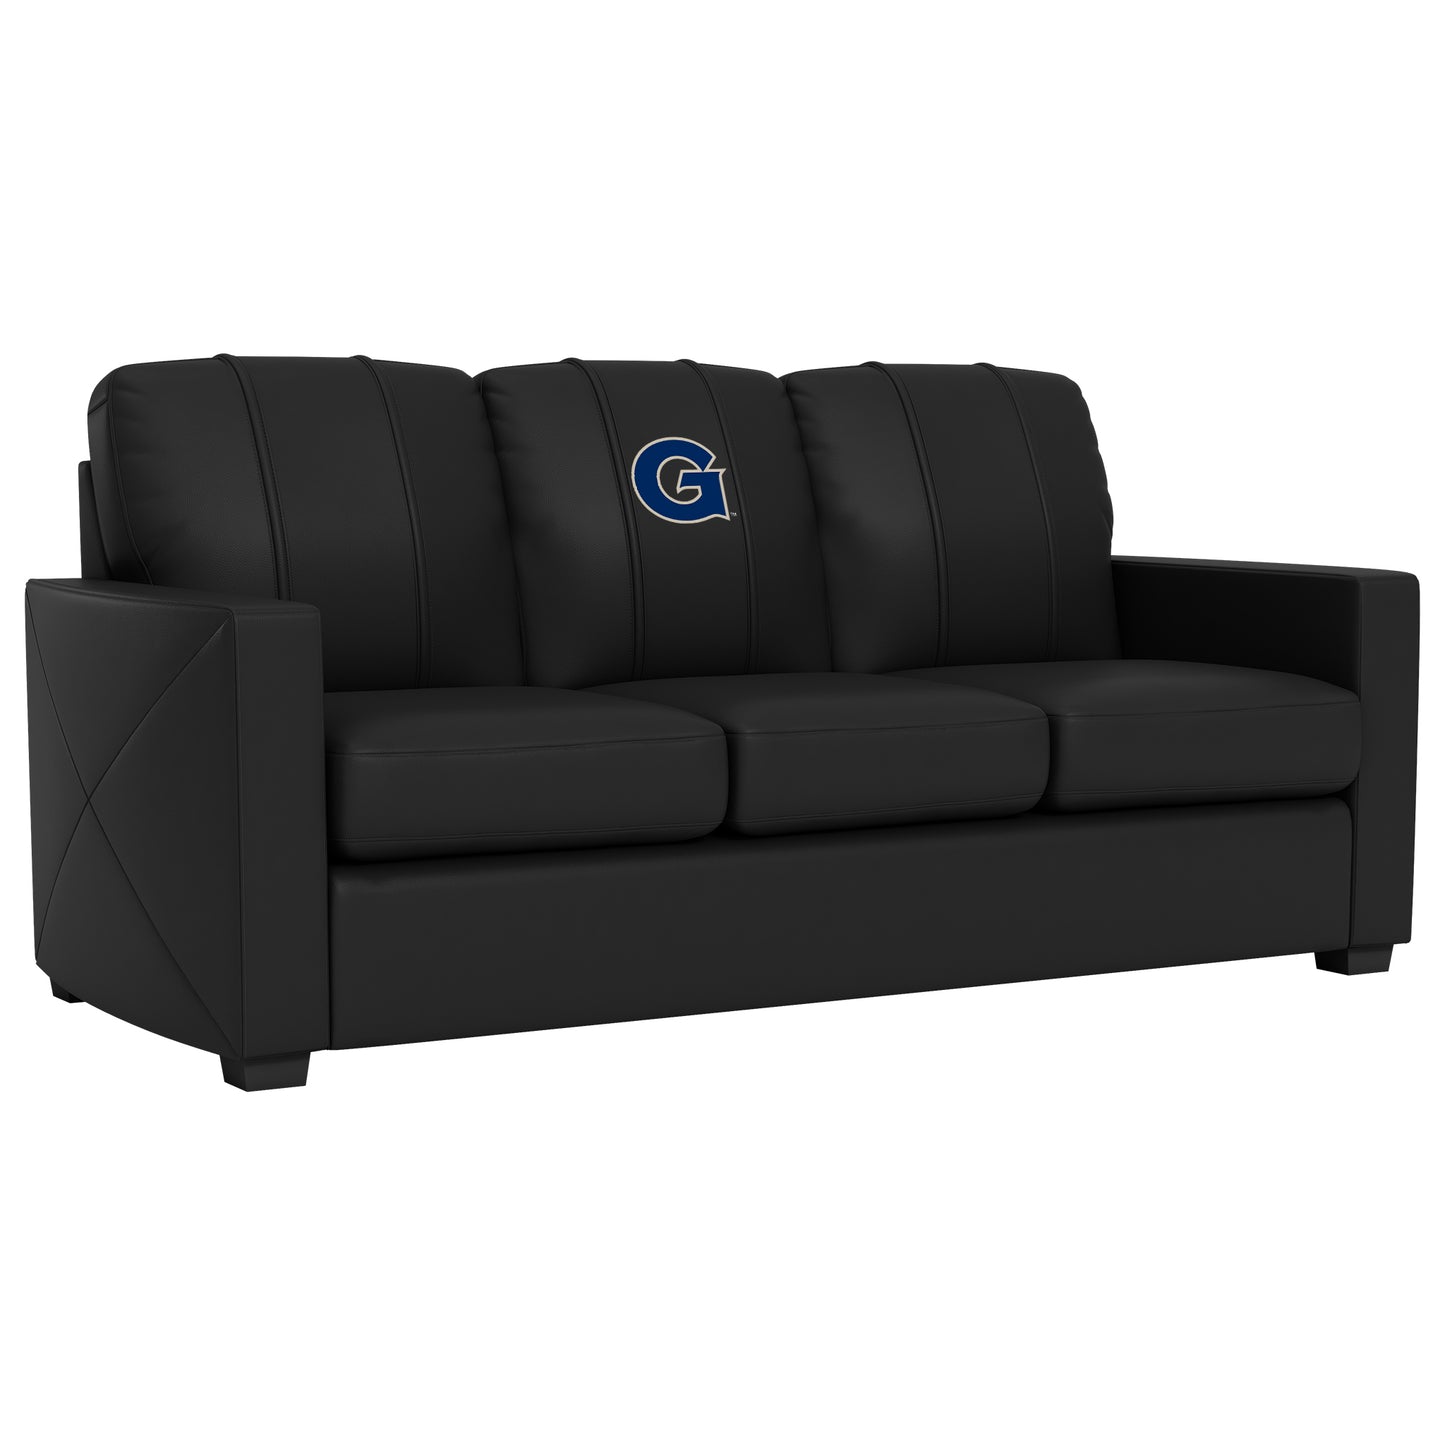 Silver Sofa with Georgetown Hoyas Primary